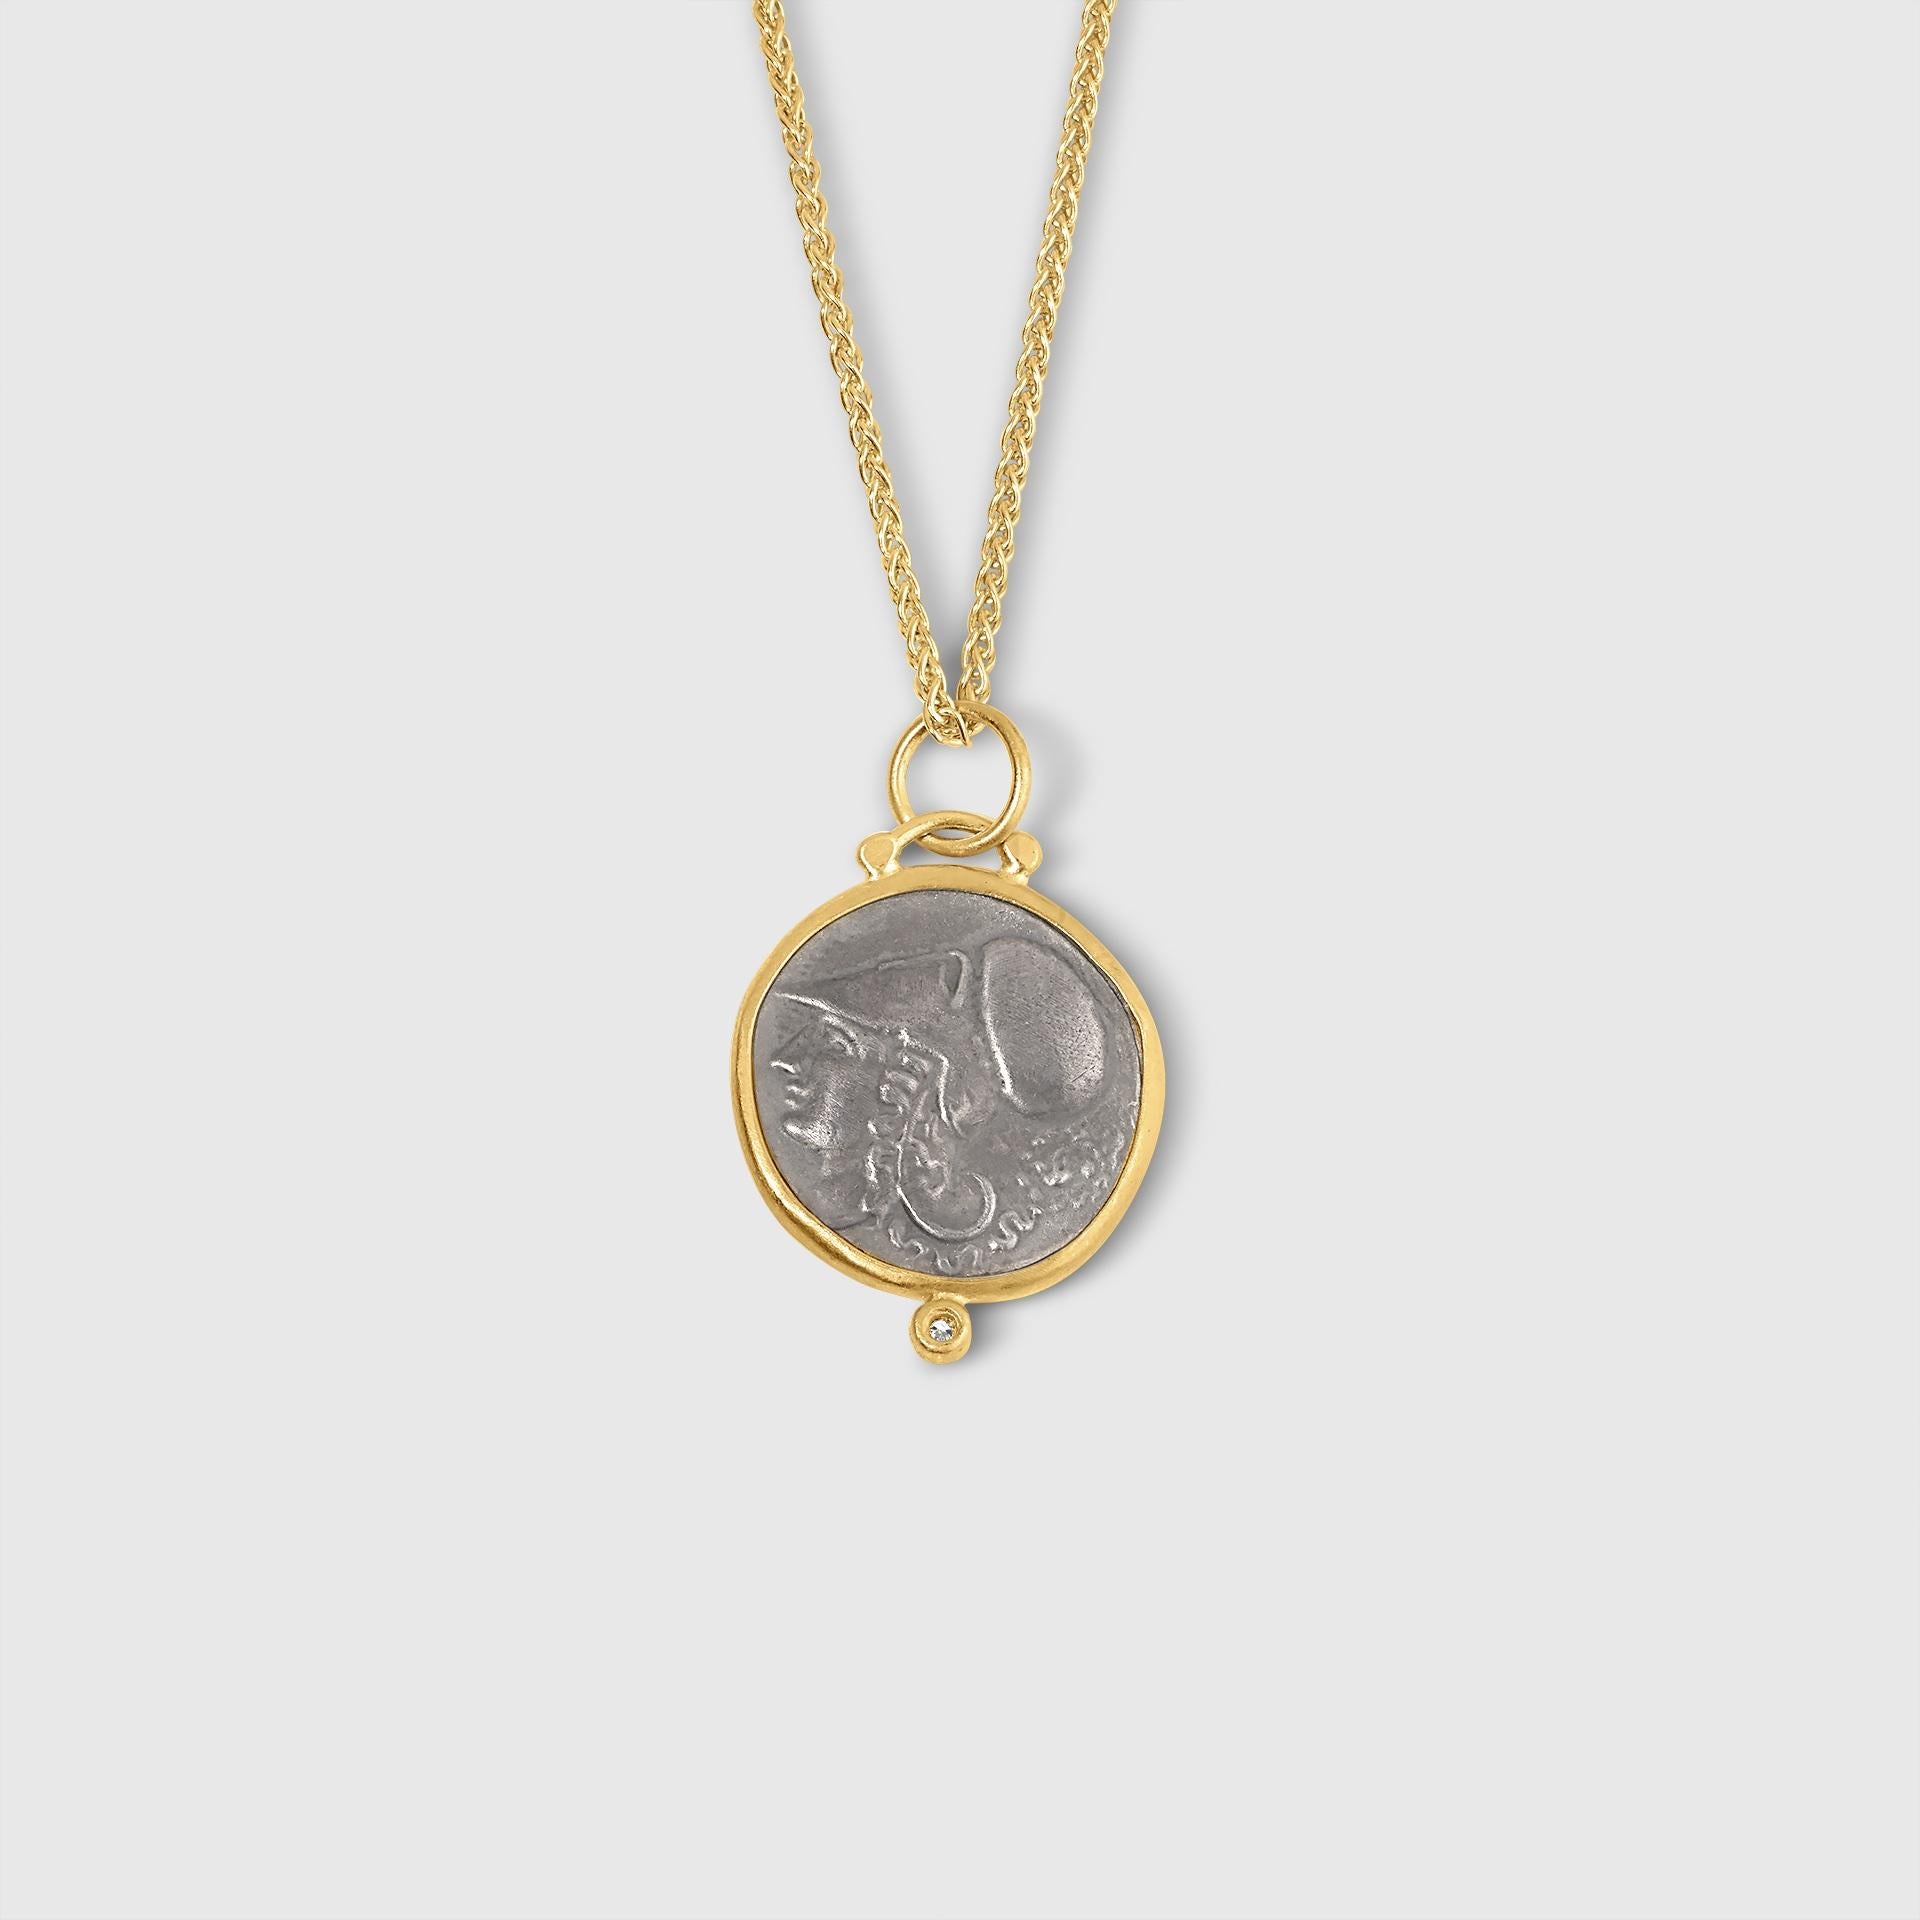 Contemporary Medium Pegasus Charm Pendant Necklace with Athena on Back and Diamond, 24kt Gold